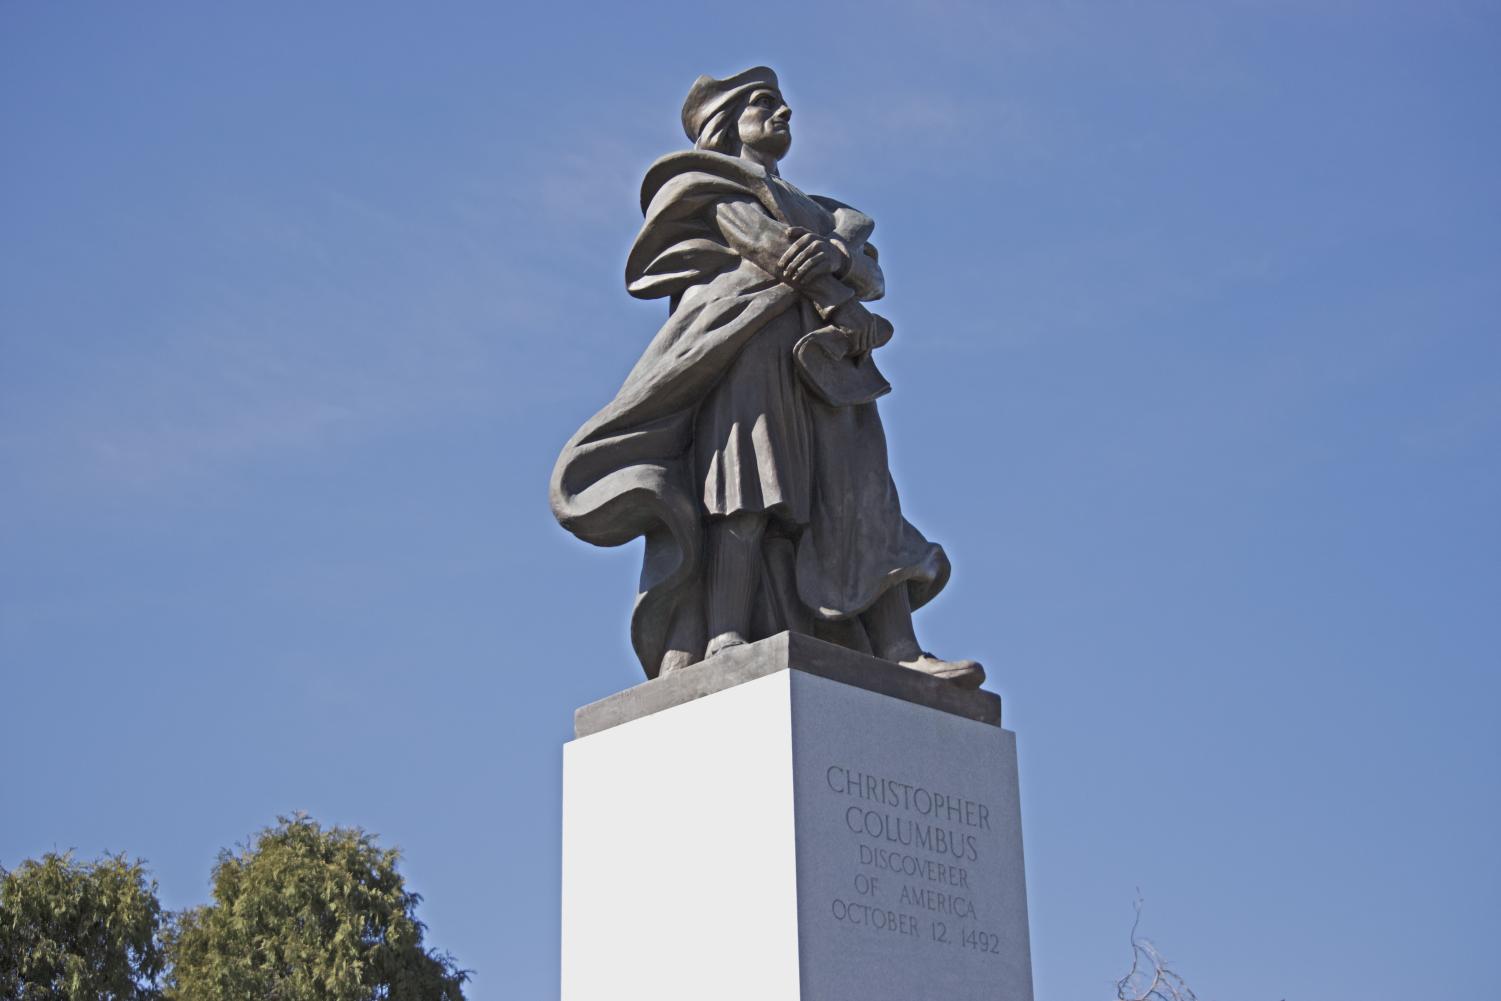 Like with the McKinley statue, by constructing a statue of Columbus on the land of the people that he abused, the creators of the monument are disrespecting the victims of the situation and highlighting the ignorance that shadows him.